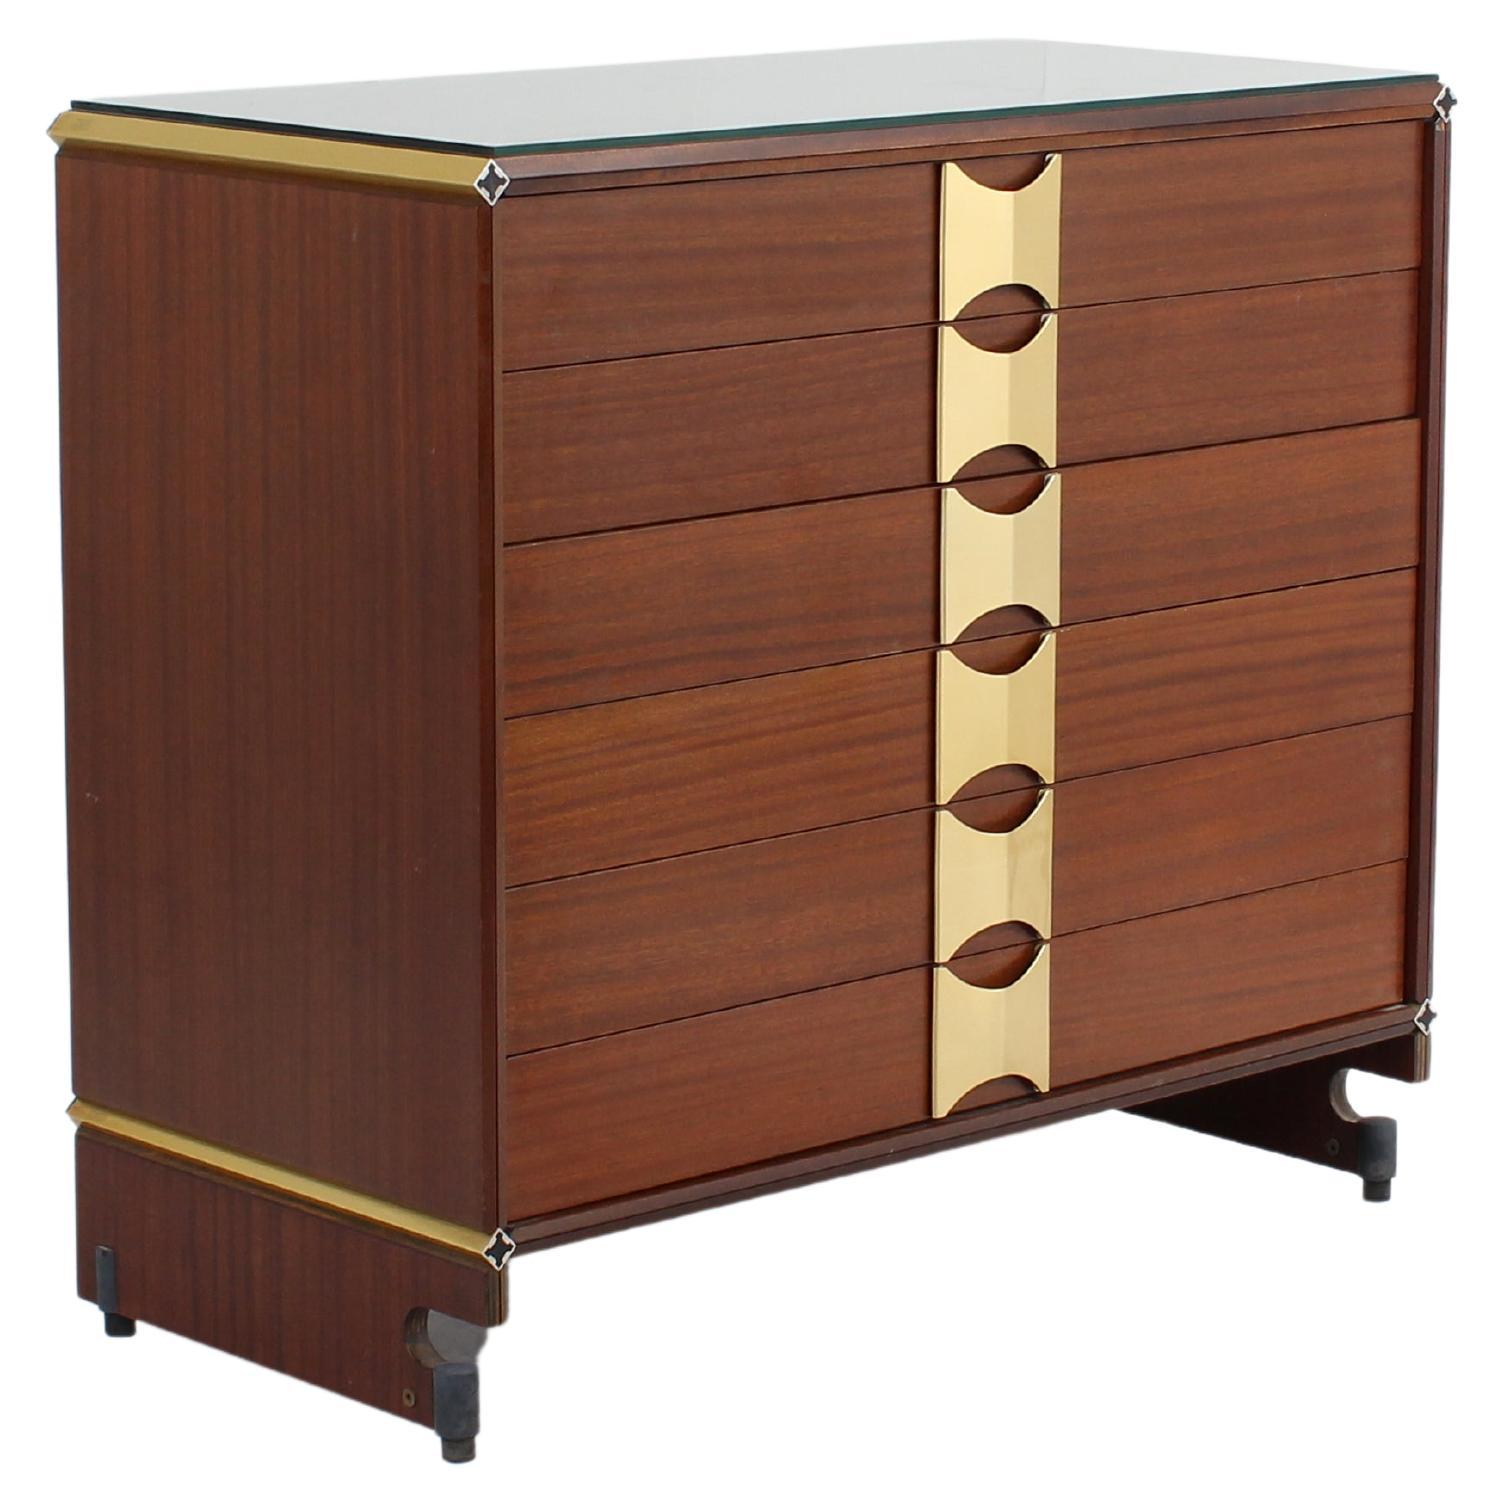 Mid-Century Series "Fitting" by Piarotto Wooden Chest of Drawers Italy 70s For Sale